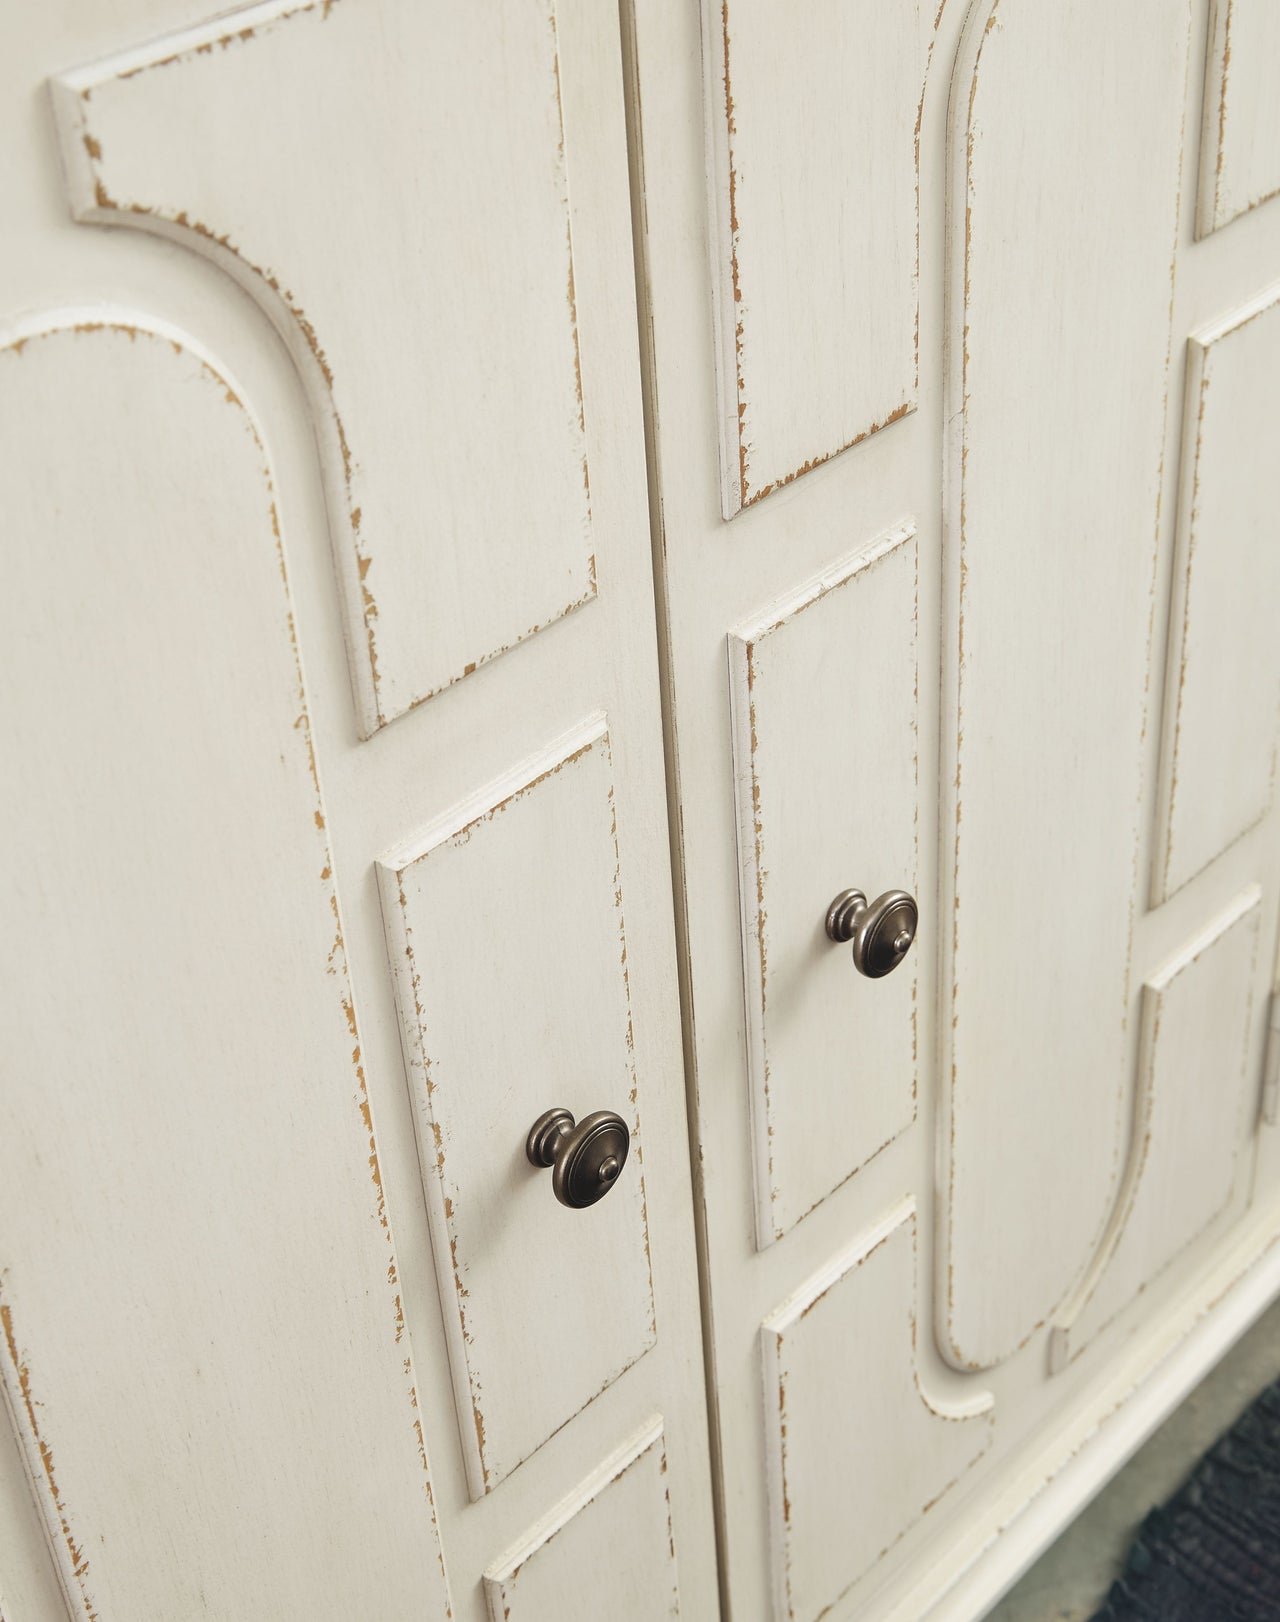 Roranville - Antique White - Accent Cabinet - Tony's Home Furnishings